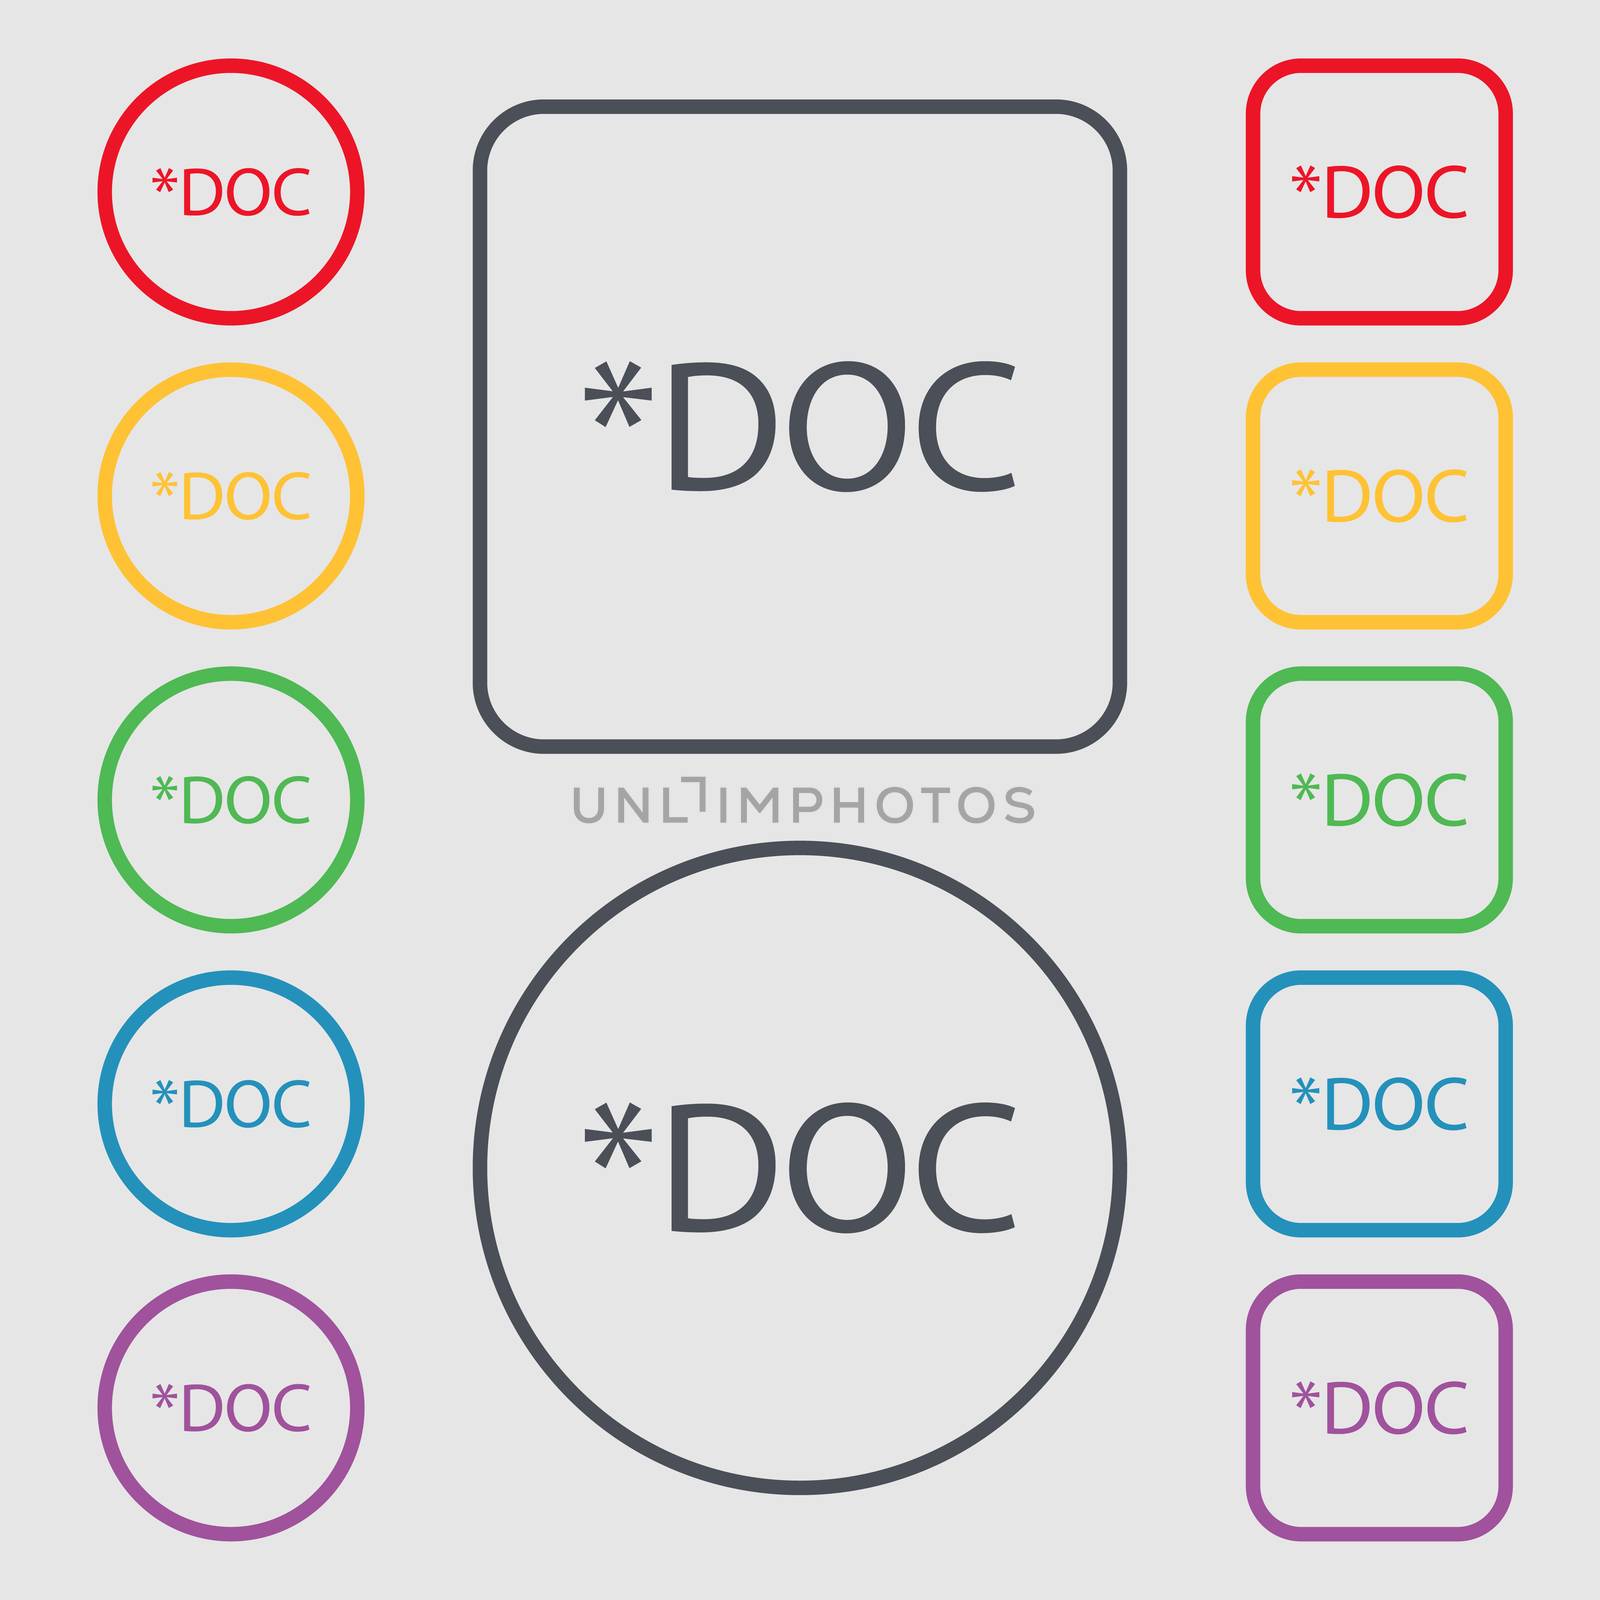 File document icon. Download doc button. Doc file extension symbol. Symbols on the Round and square buttons with frame. illustration